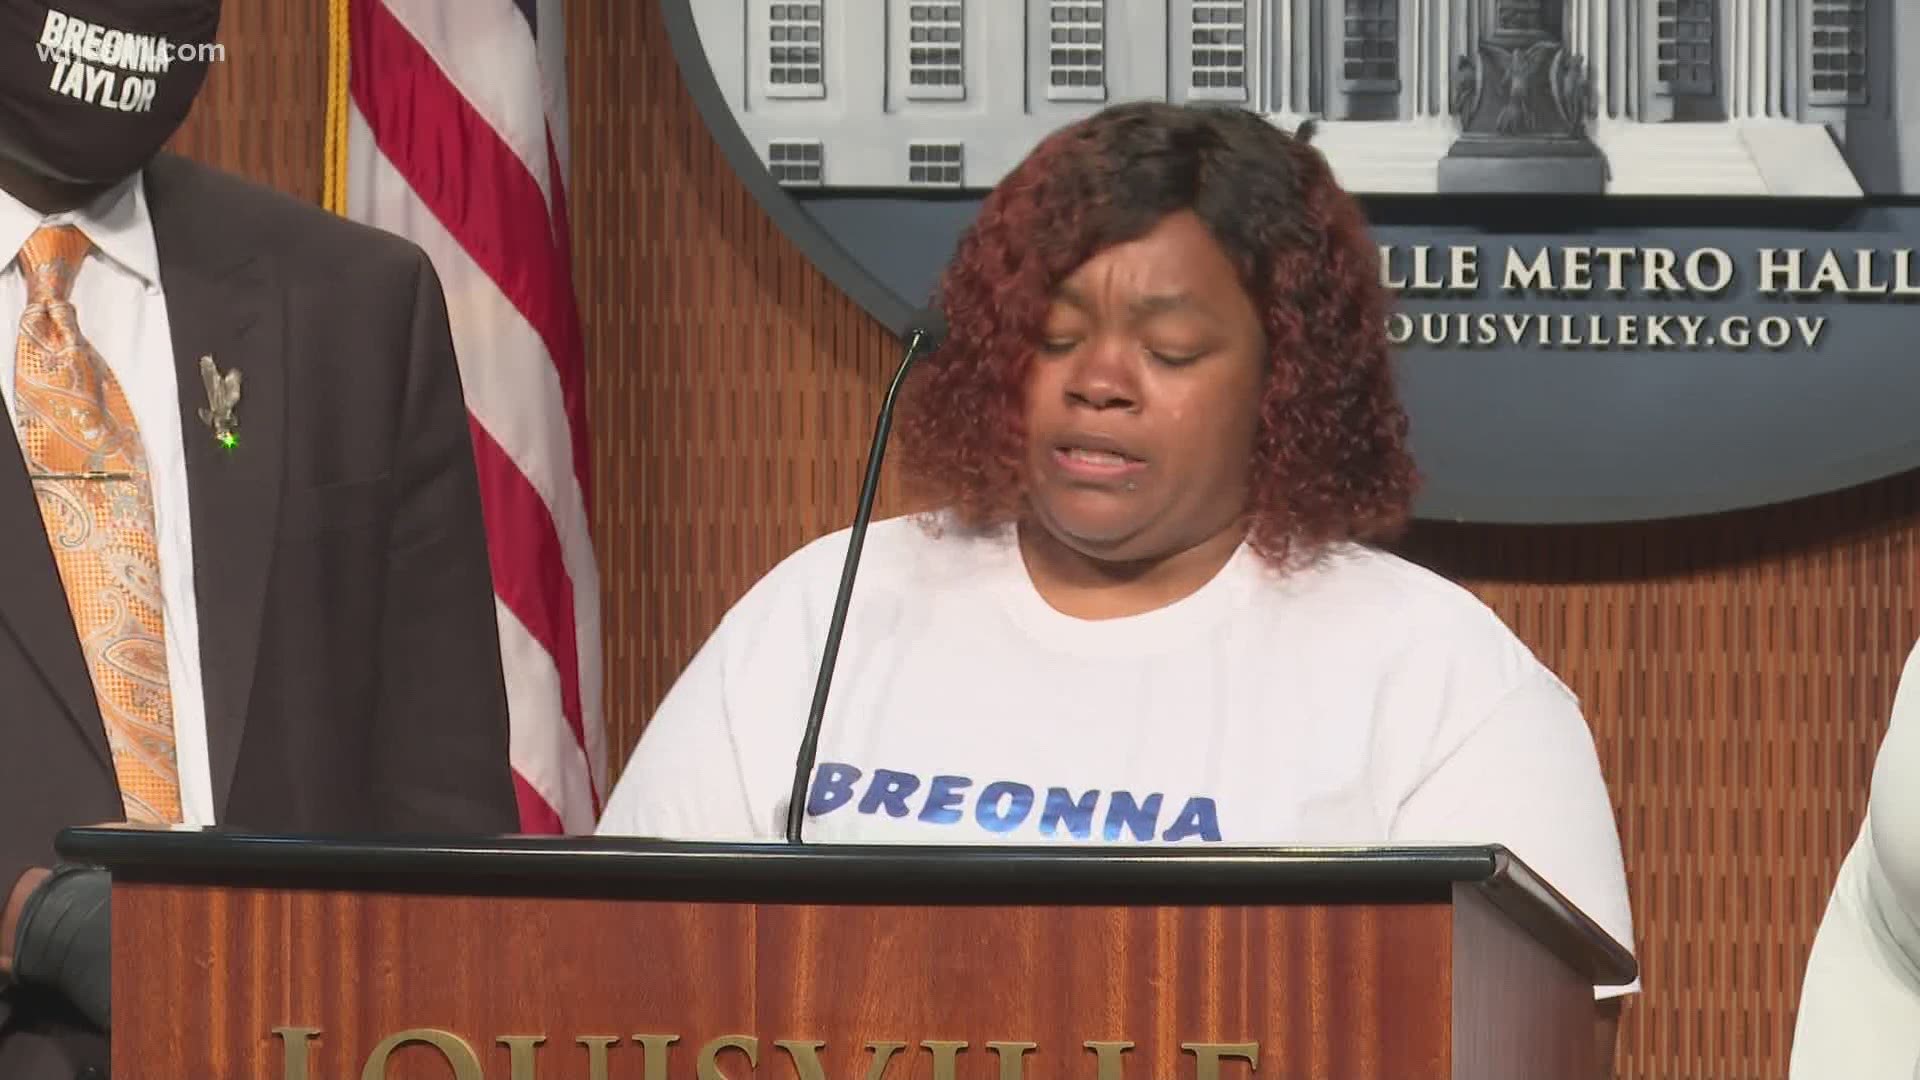 As a decision is pending on charging officers in the Breonna Taylor case, The City of Louisville is paying a $12 million settlement, the largest ever for the city.